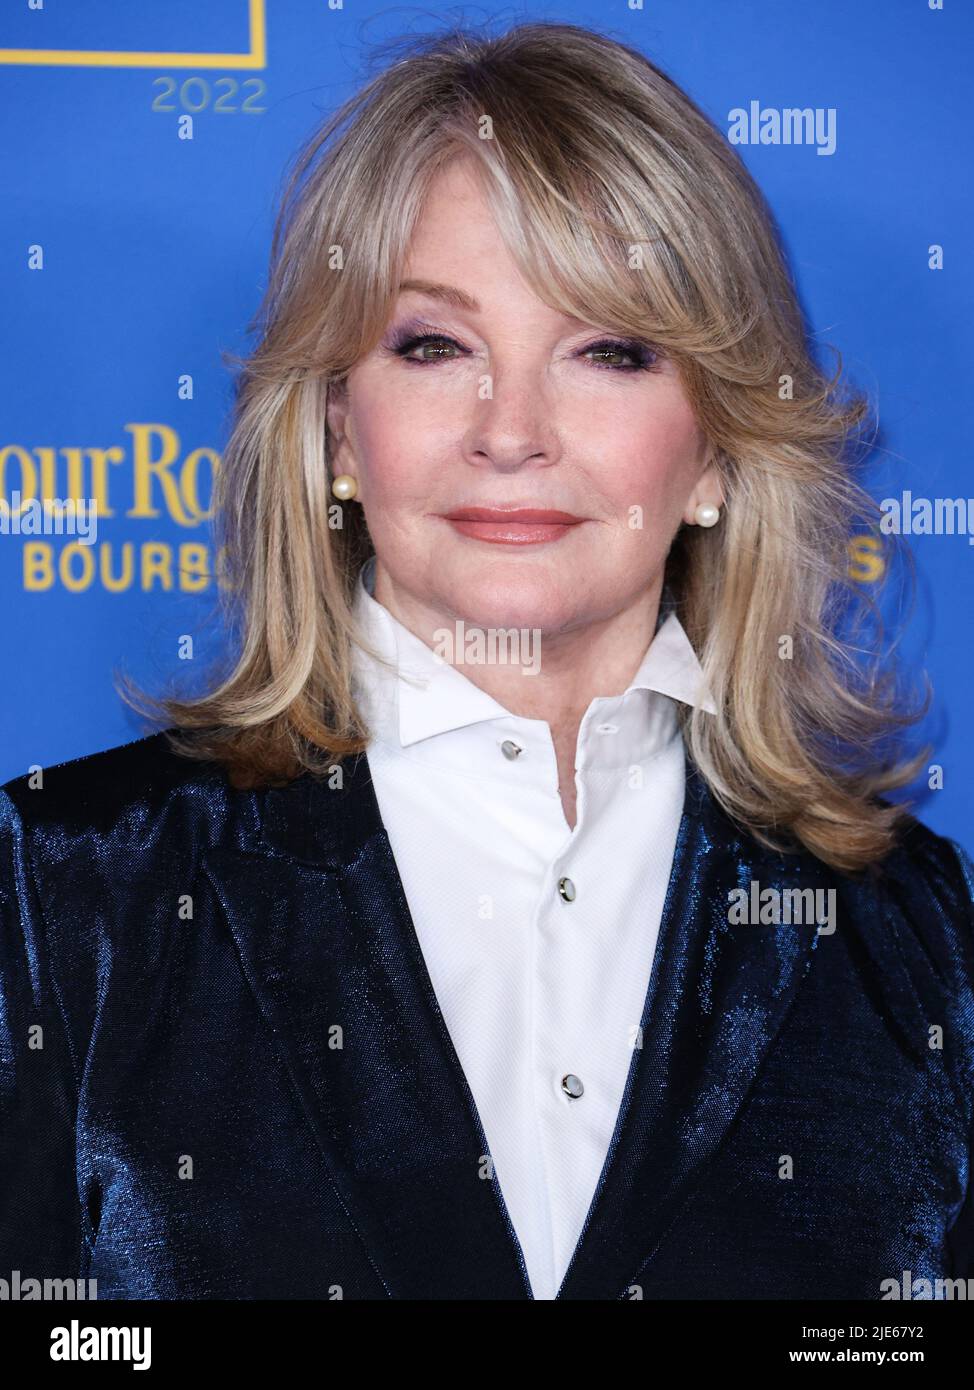 PASADENA, LOS ANGELES, CALIFORNIA, USA - JUNE 24: Deidre Hall arrives at the 49th Daytime Emmy Awards held at the Pasadena Convention Center on June 24, 2022 in Pasadena, Los Angeles, California, United States. (Photo by Xavier Collin/Image Press Agency) Stock Photo